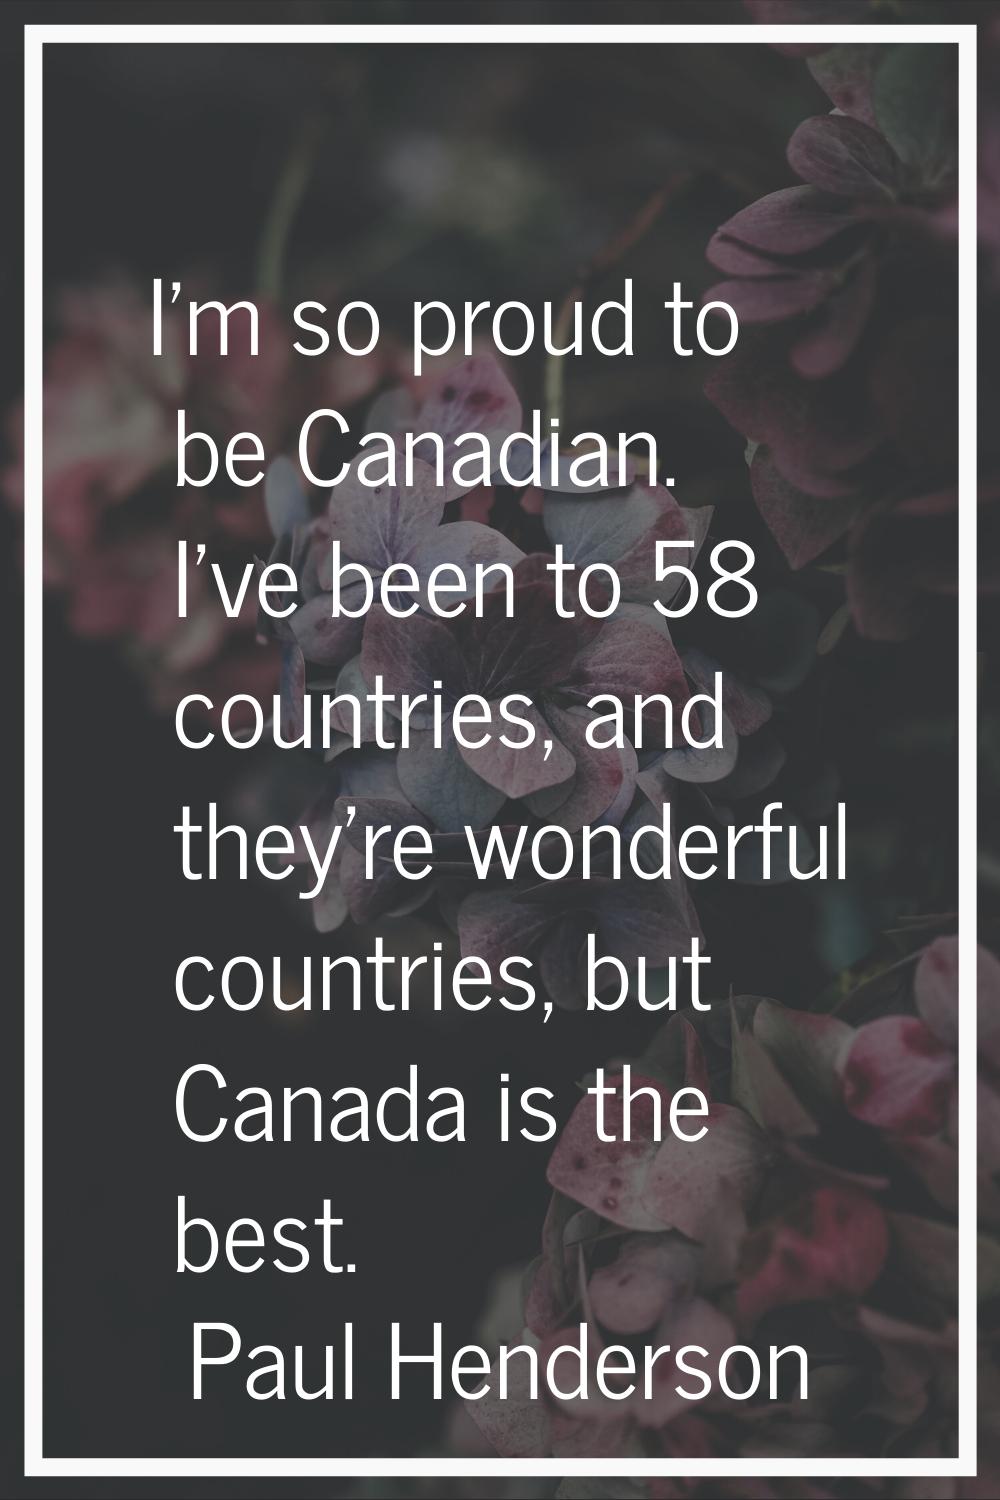 I'm so proud to be Canadian. I've been to 58 countries, and they're wonderful countries, but Canada